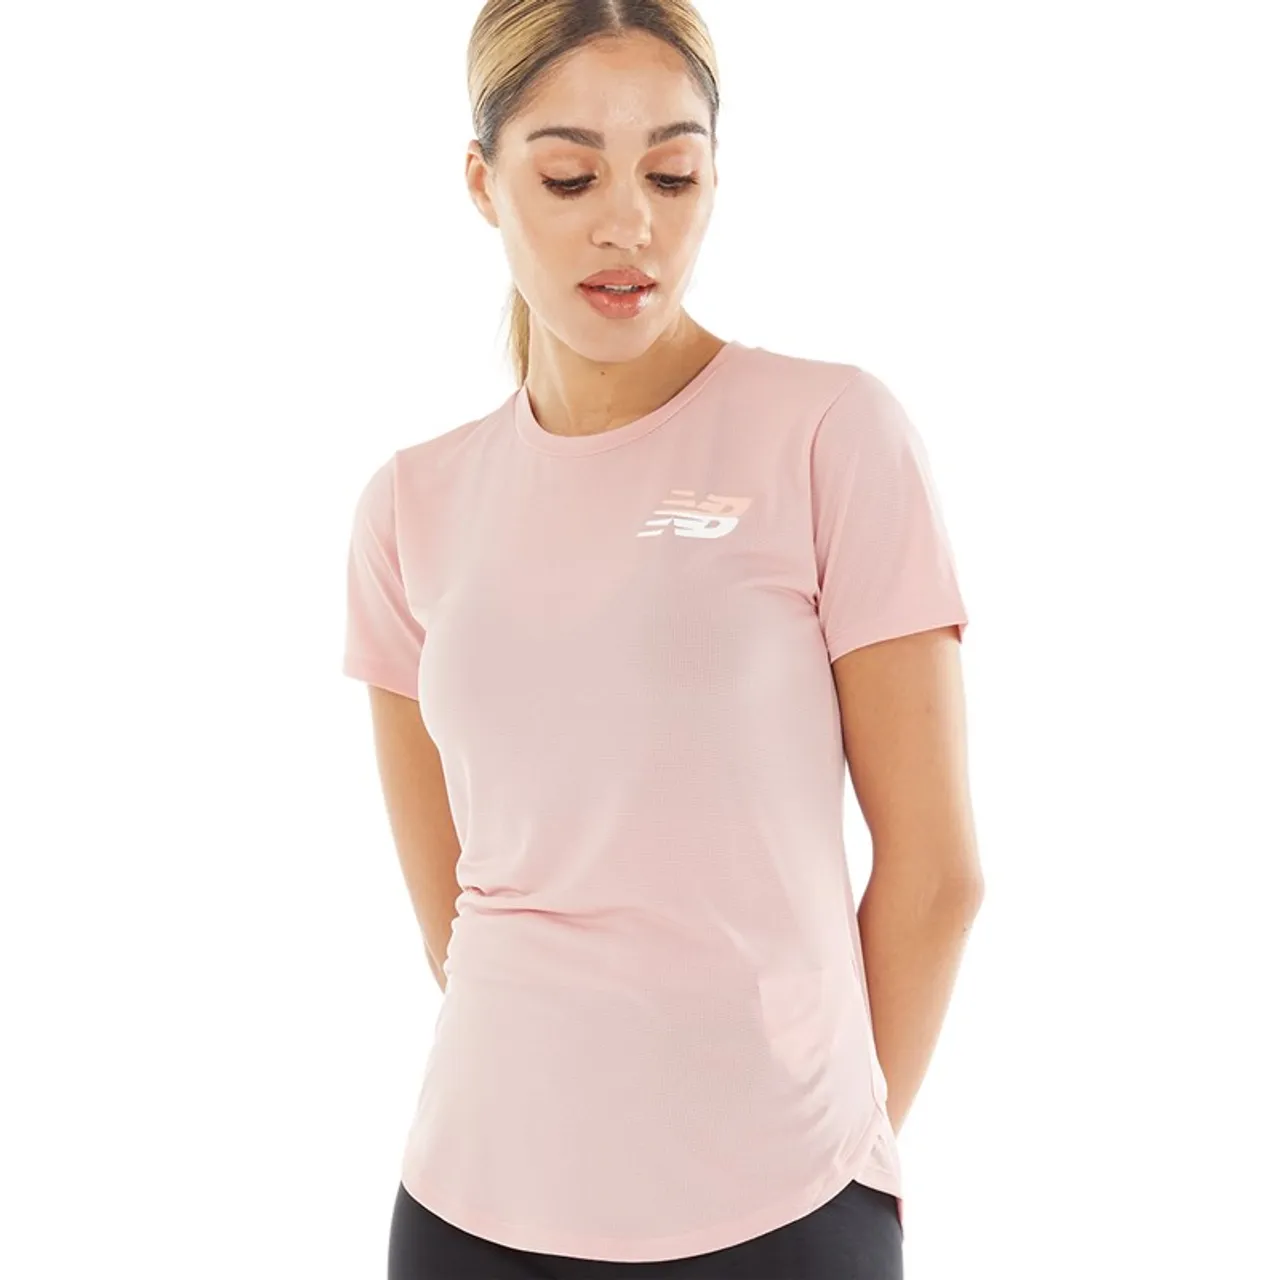 New Balance Womens Graphic Accelerate Running Top Pink